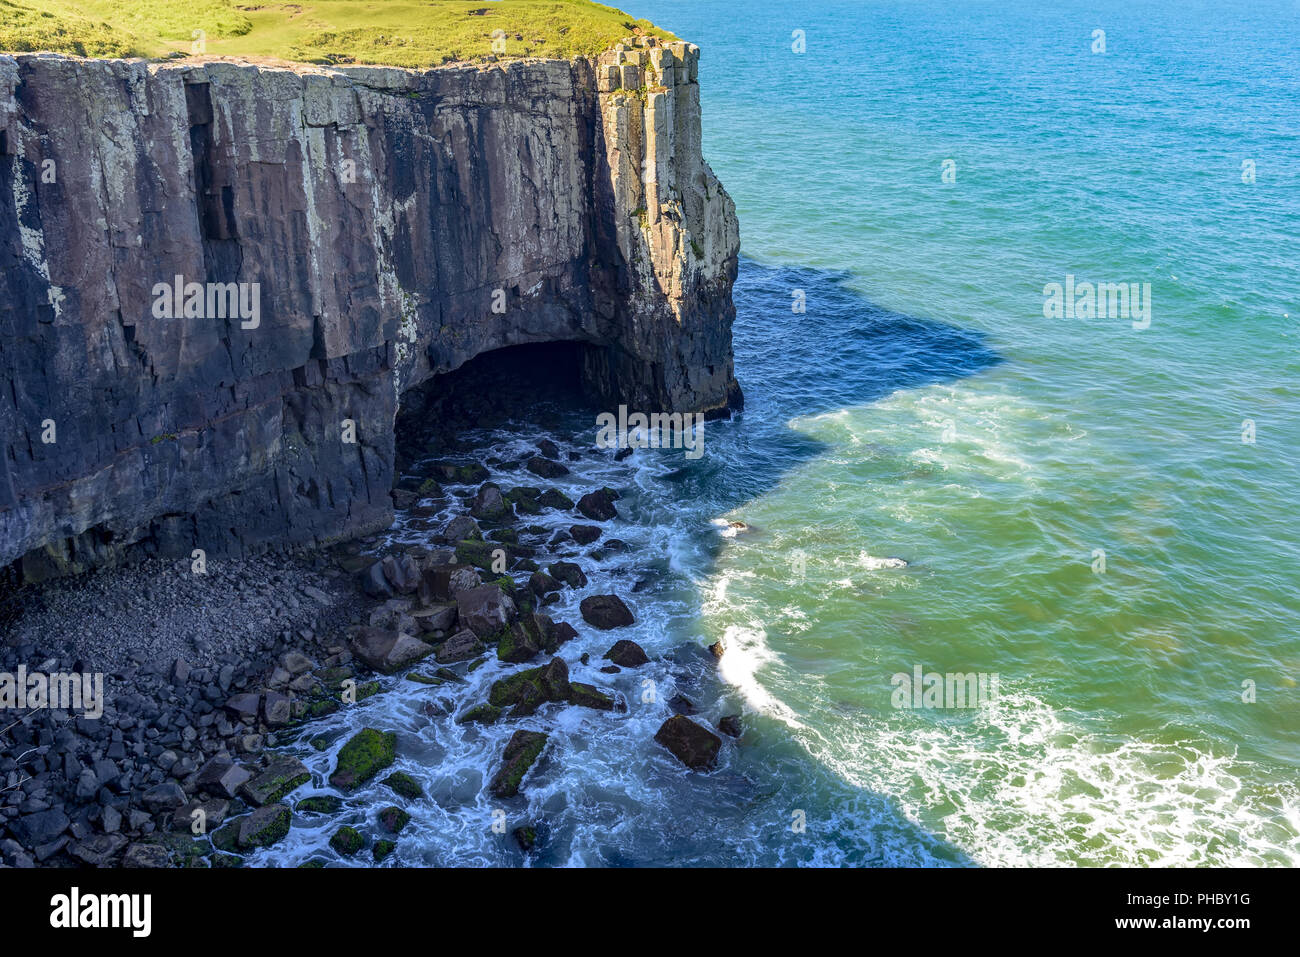 Cliff with cavern over sea Stock Photo